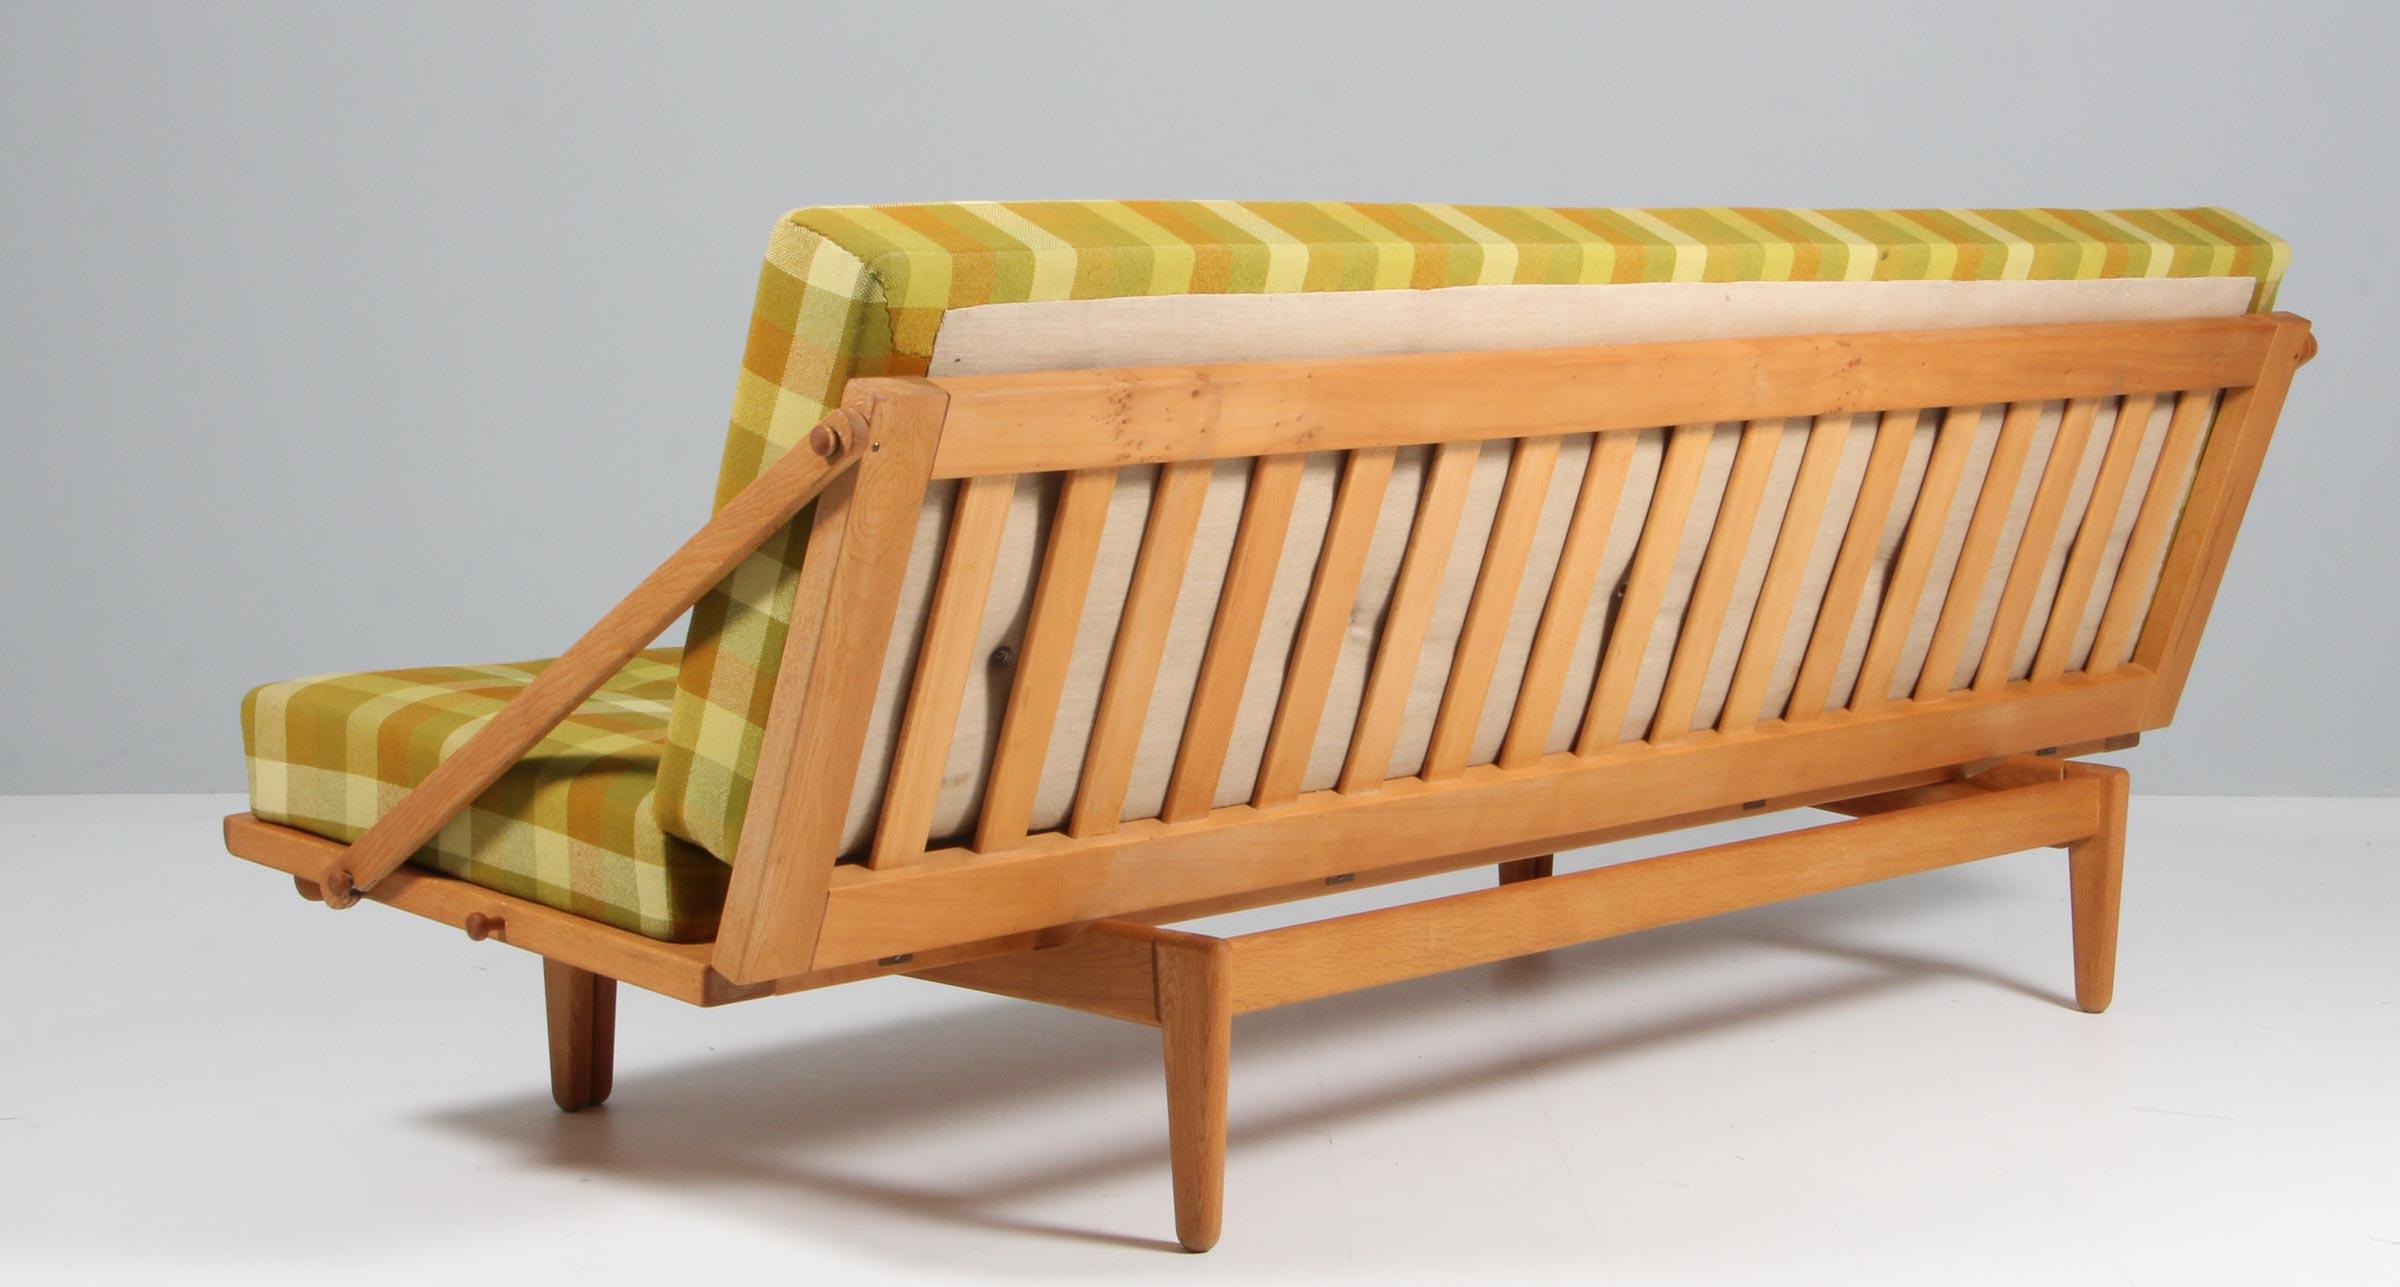 Very nice sophisticated daybed sofa Model 981 designed by Poul M Volther and manufactured by Frem Røjle, Denmark, 1959. This sofa is called 'Diva' and has a solid oak structure which can be folded down to create a daybed. Multi functional sofa. The